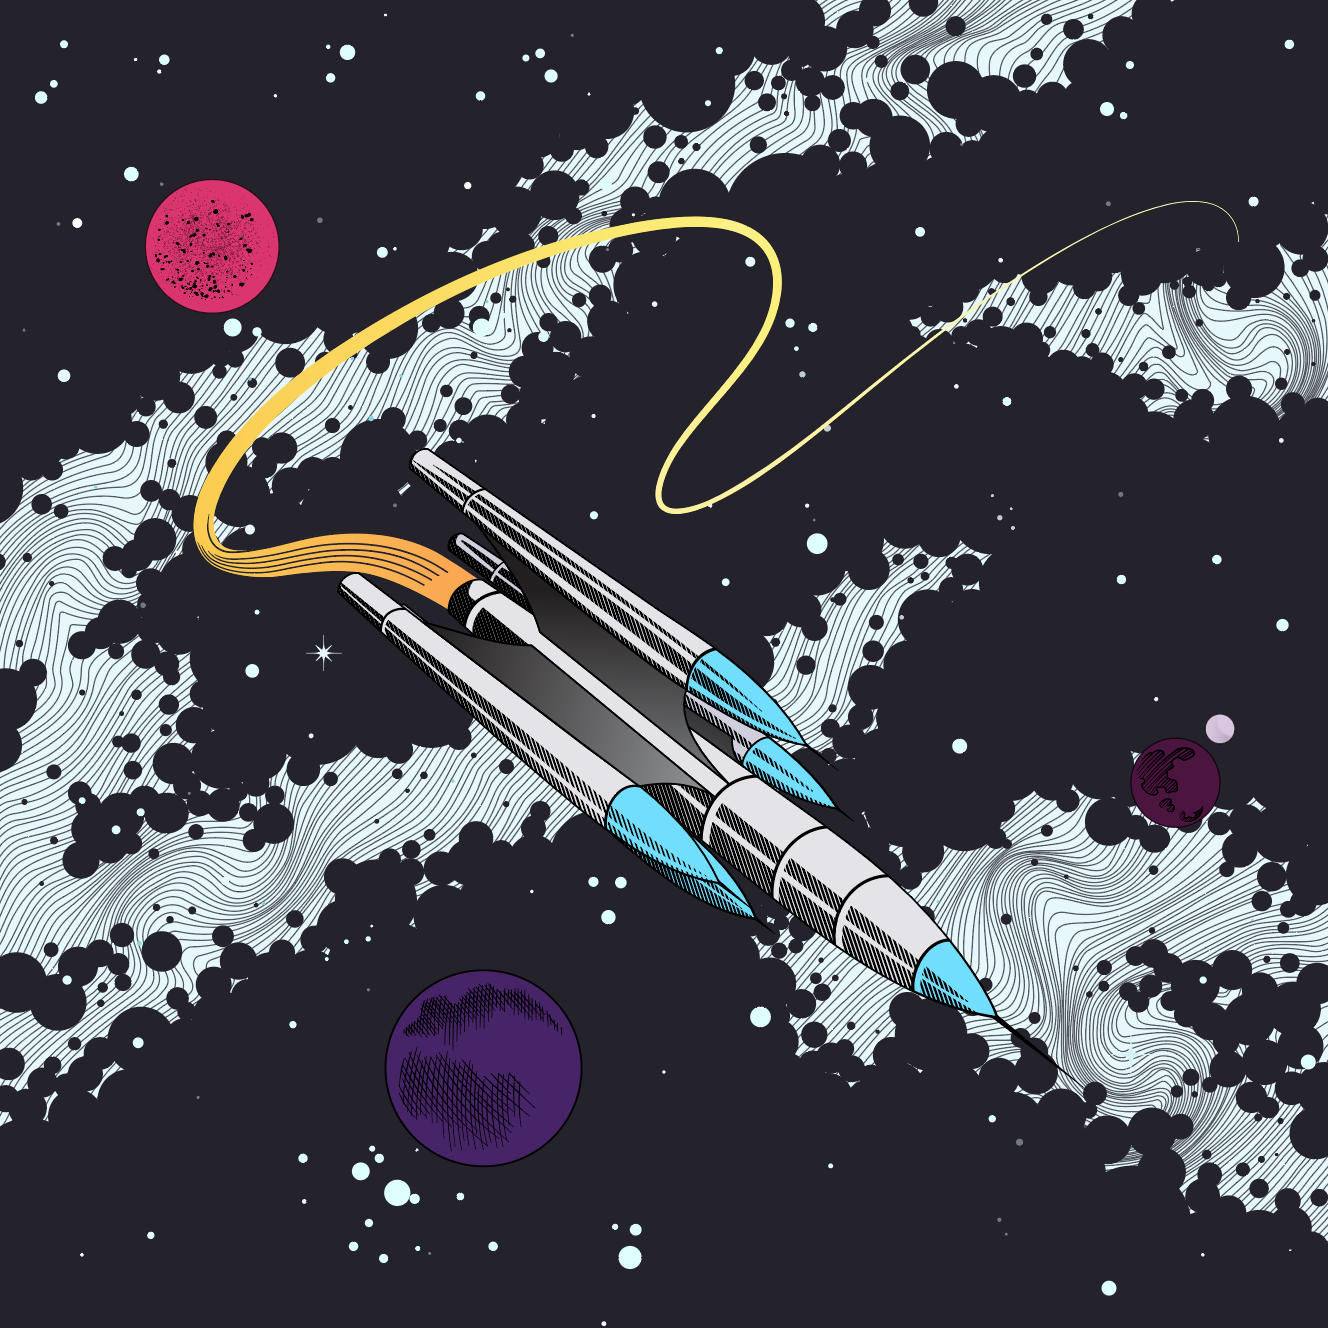 Kirby-inspired Rocket in Space